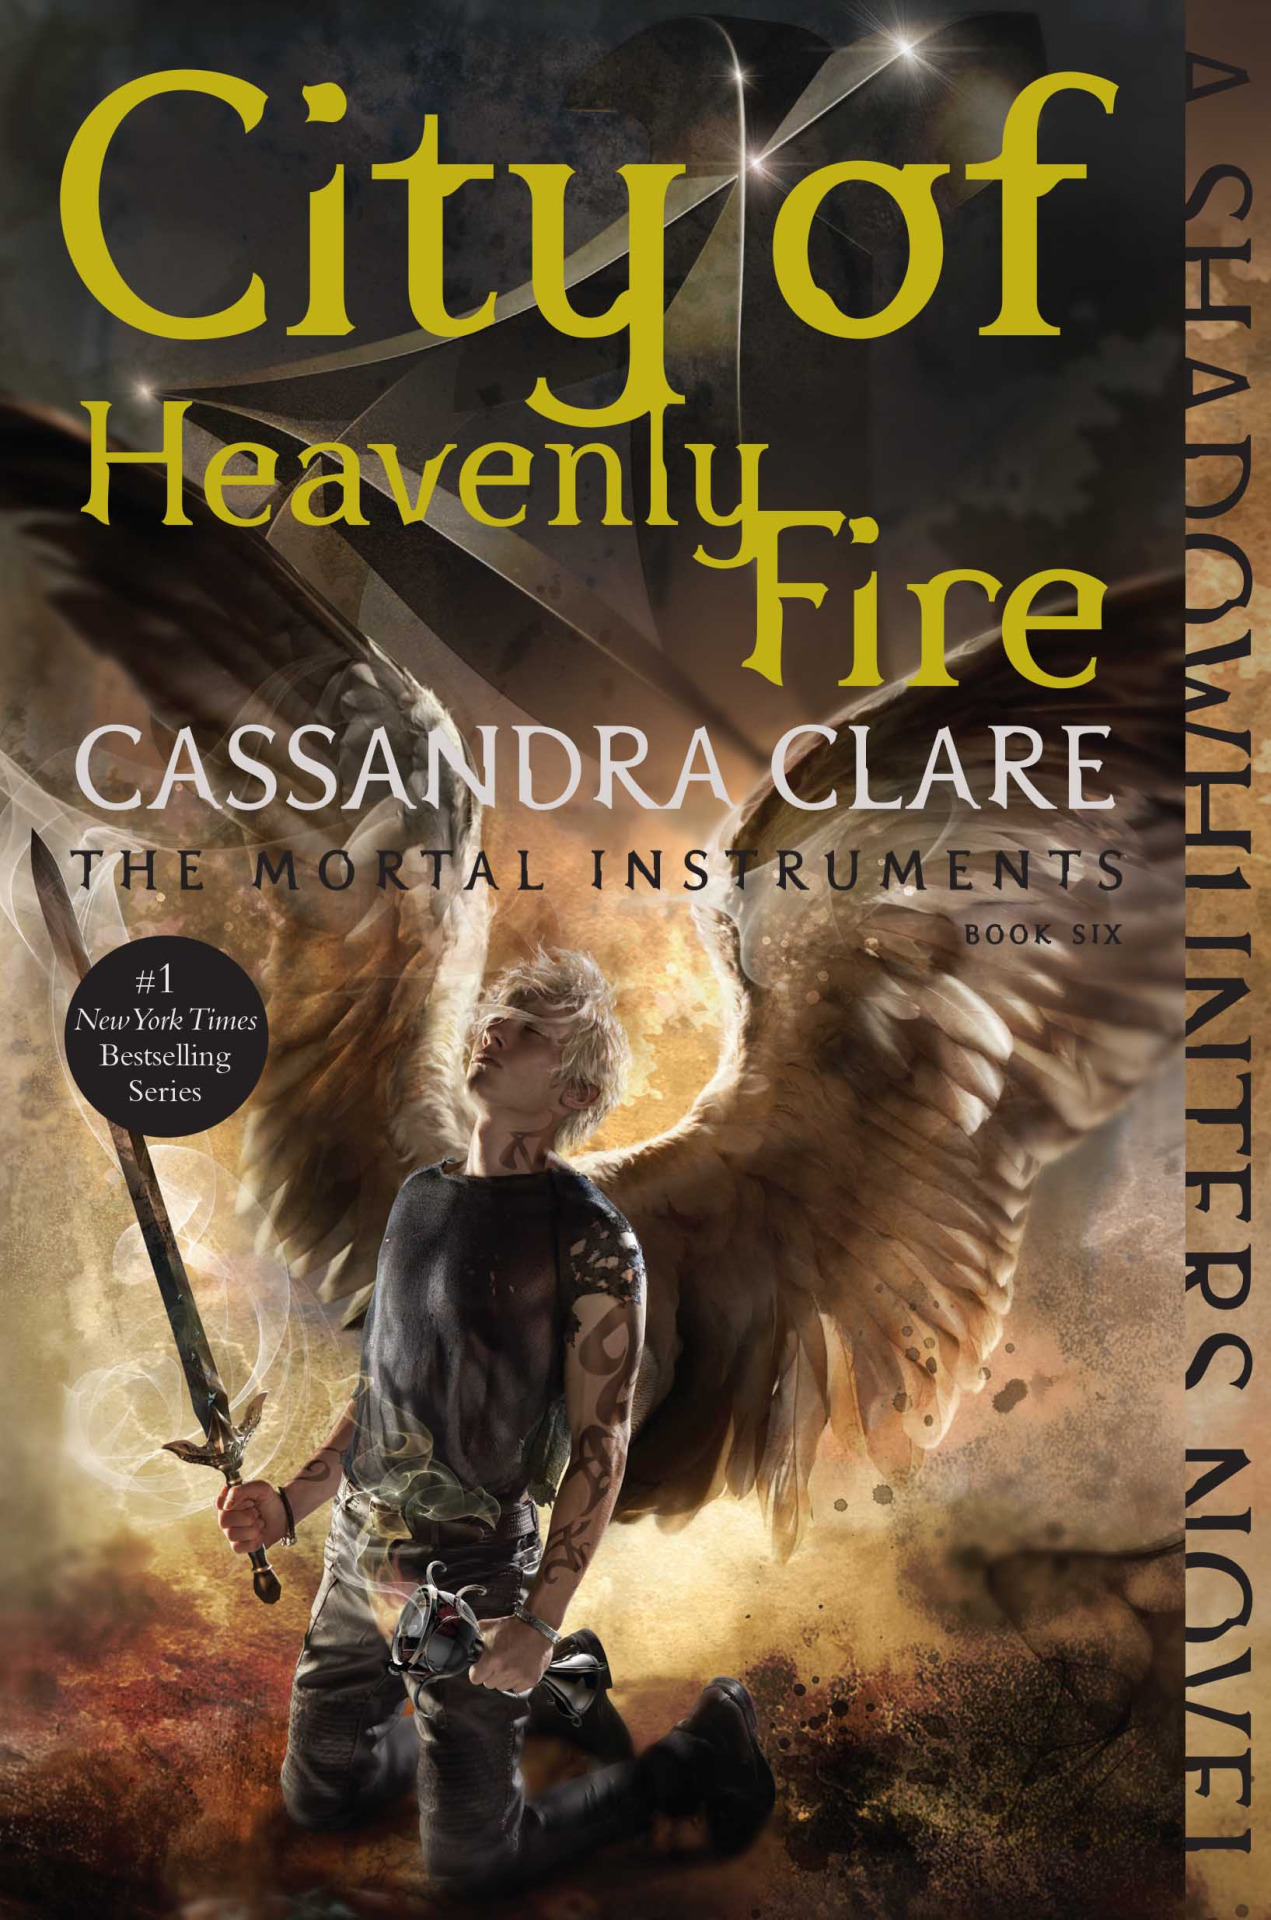 city of heavenly fire book